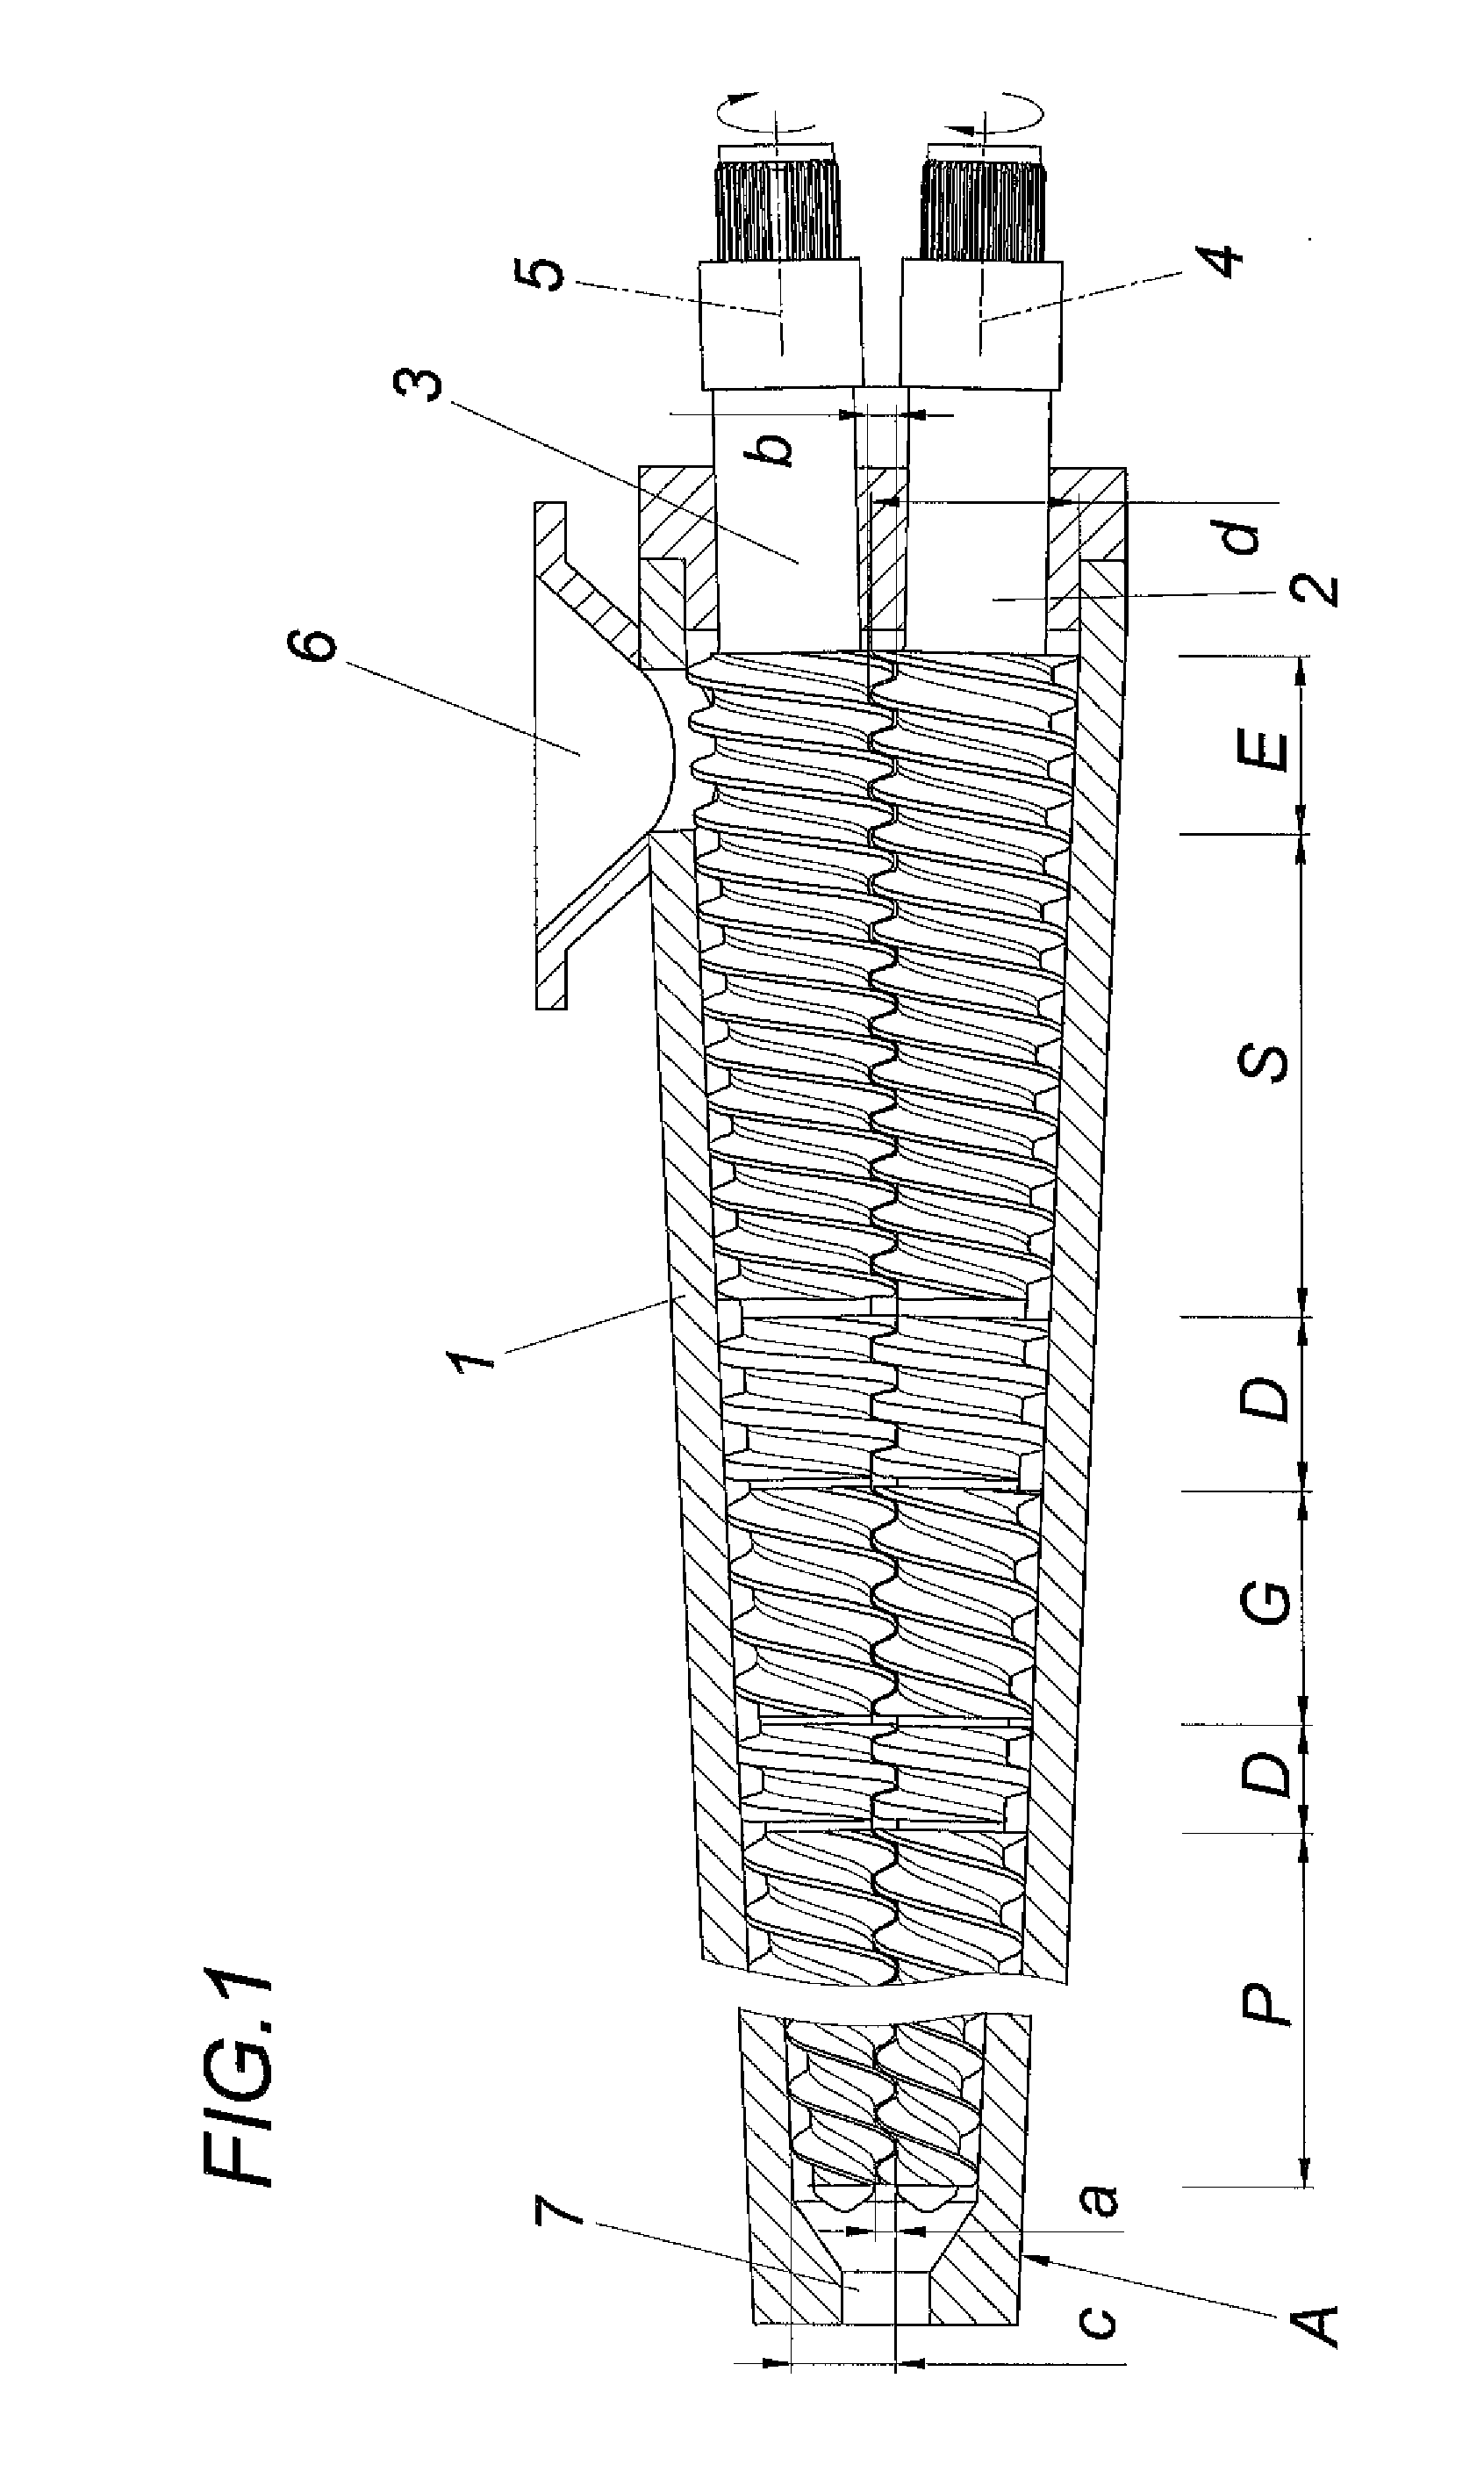 Device for processing material by mixing and/or plasticating